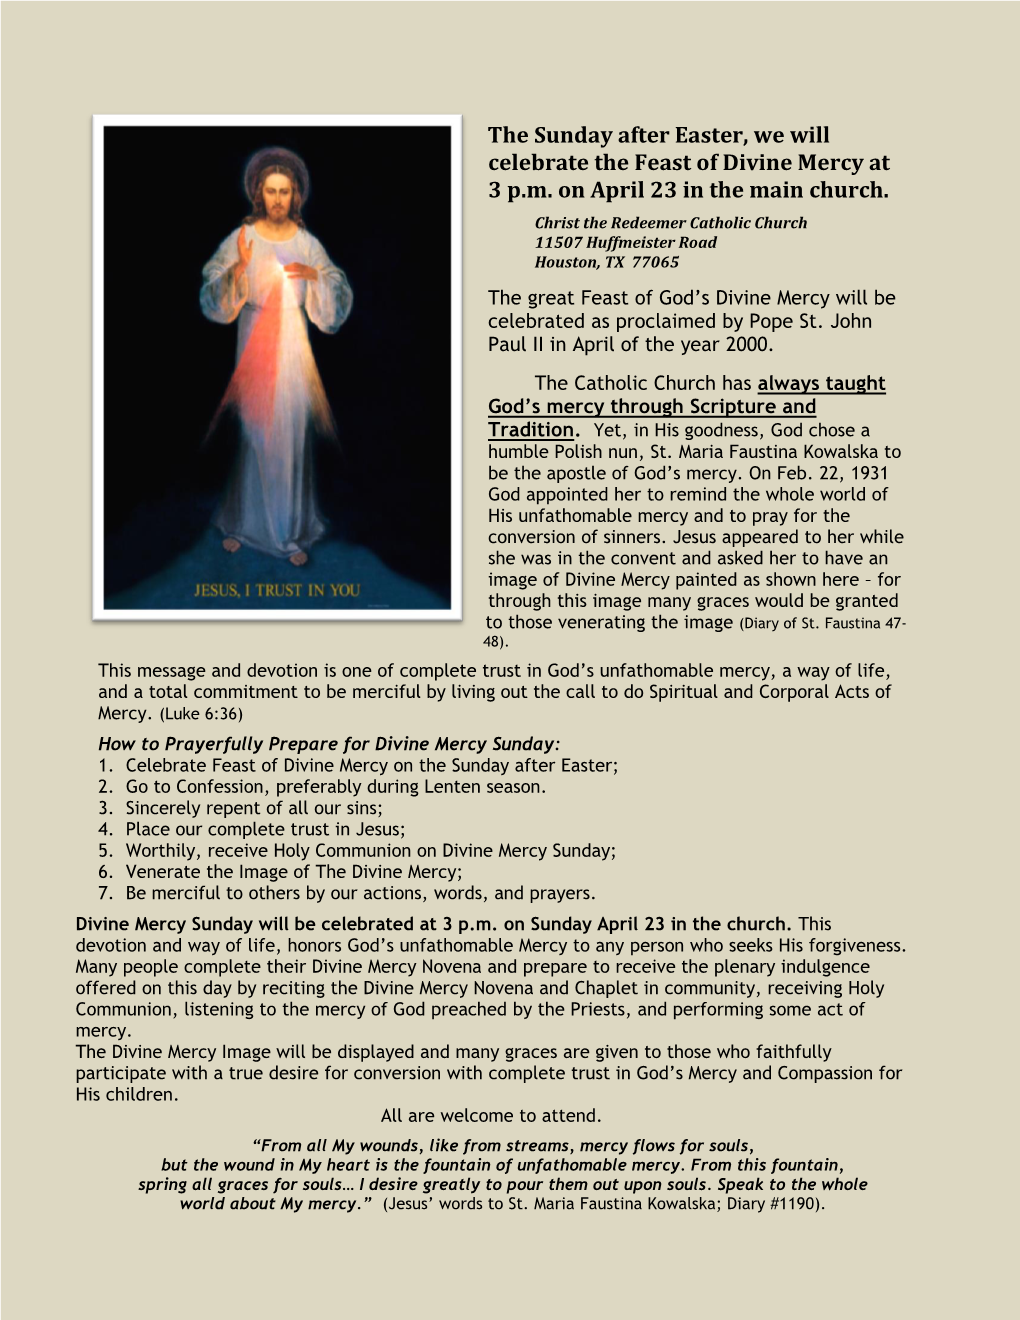 The Sunday After Easter, We Will Celebrate the Feast of Divine Mercy at 3 P.M